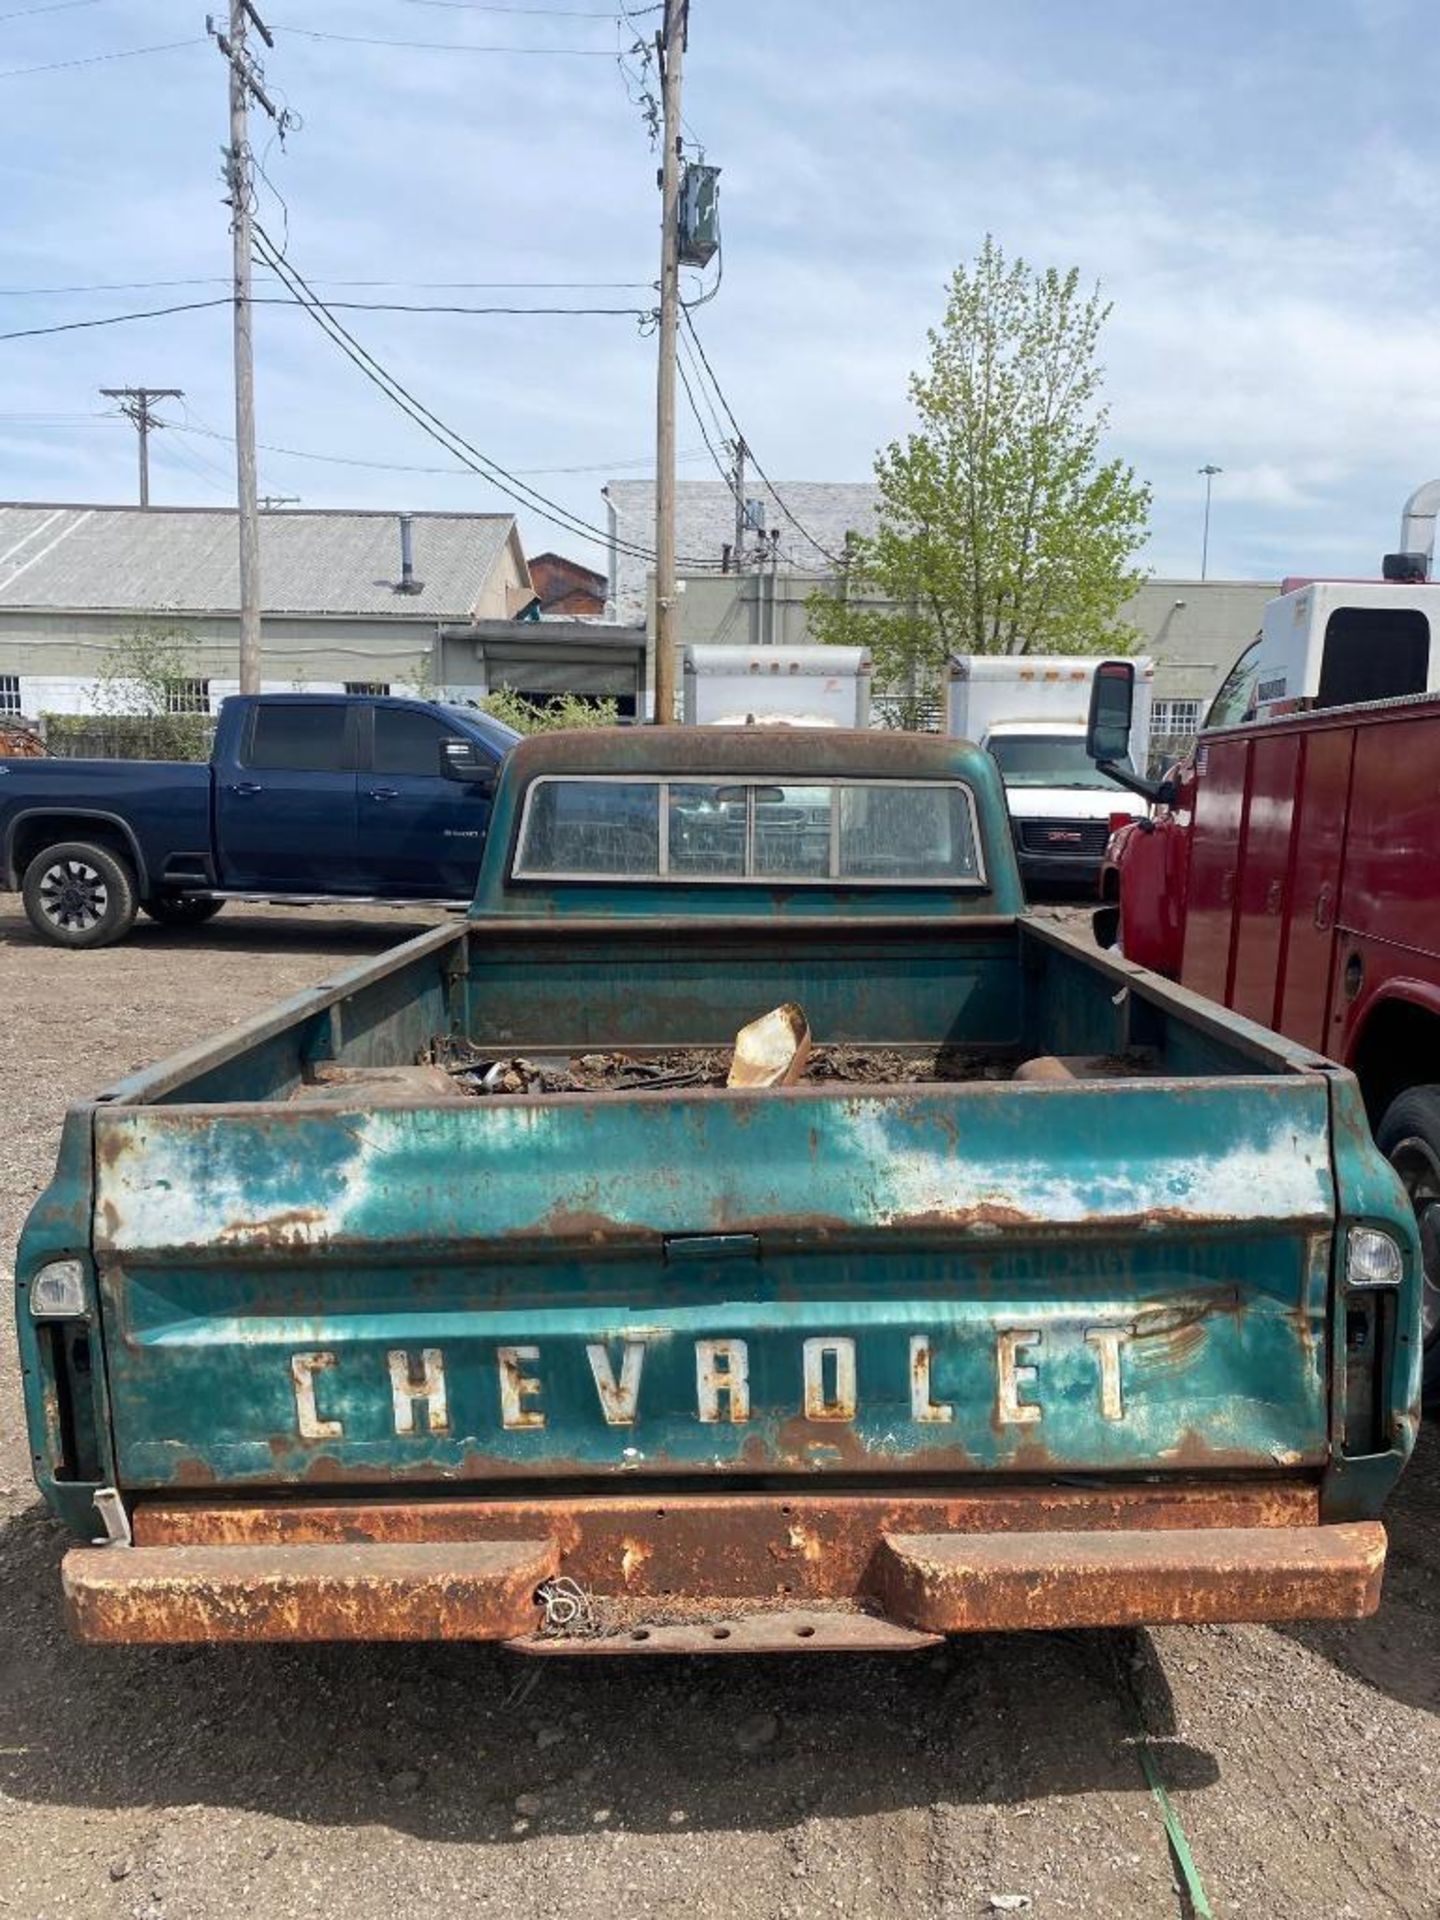 1970 C/10 Pickup Truck (for parts) - Image 9 of 10